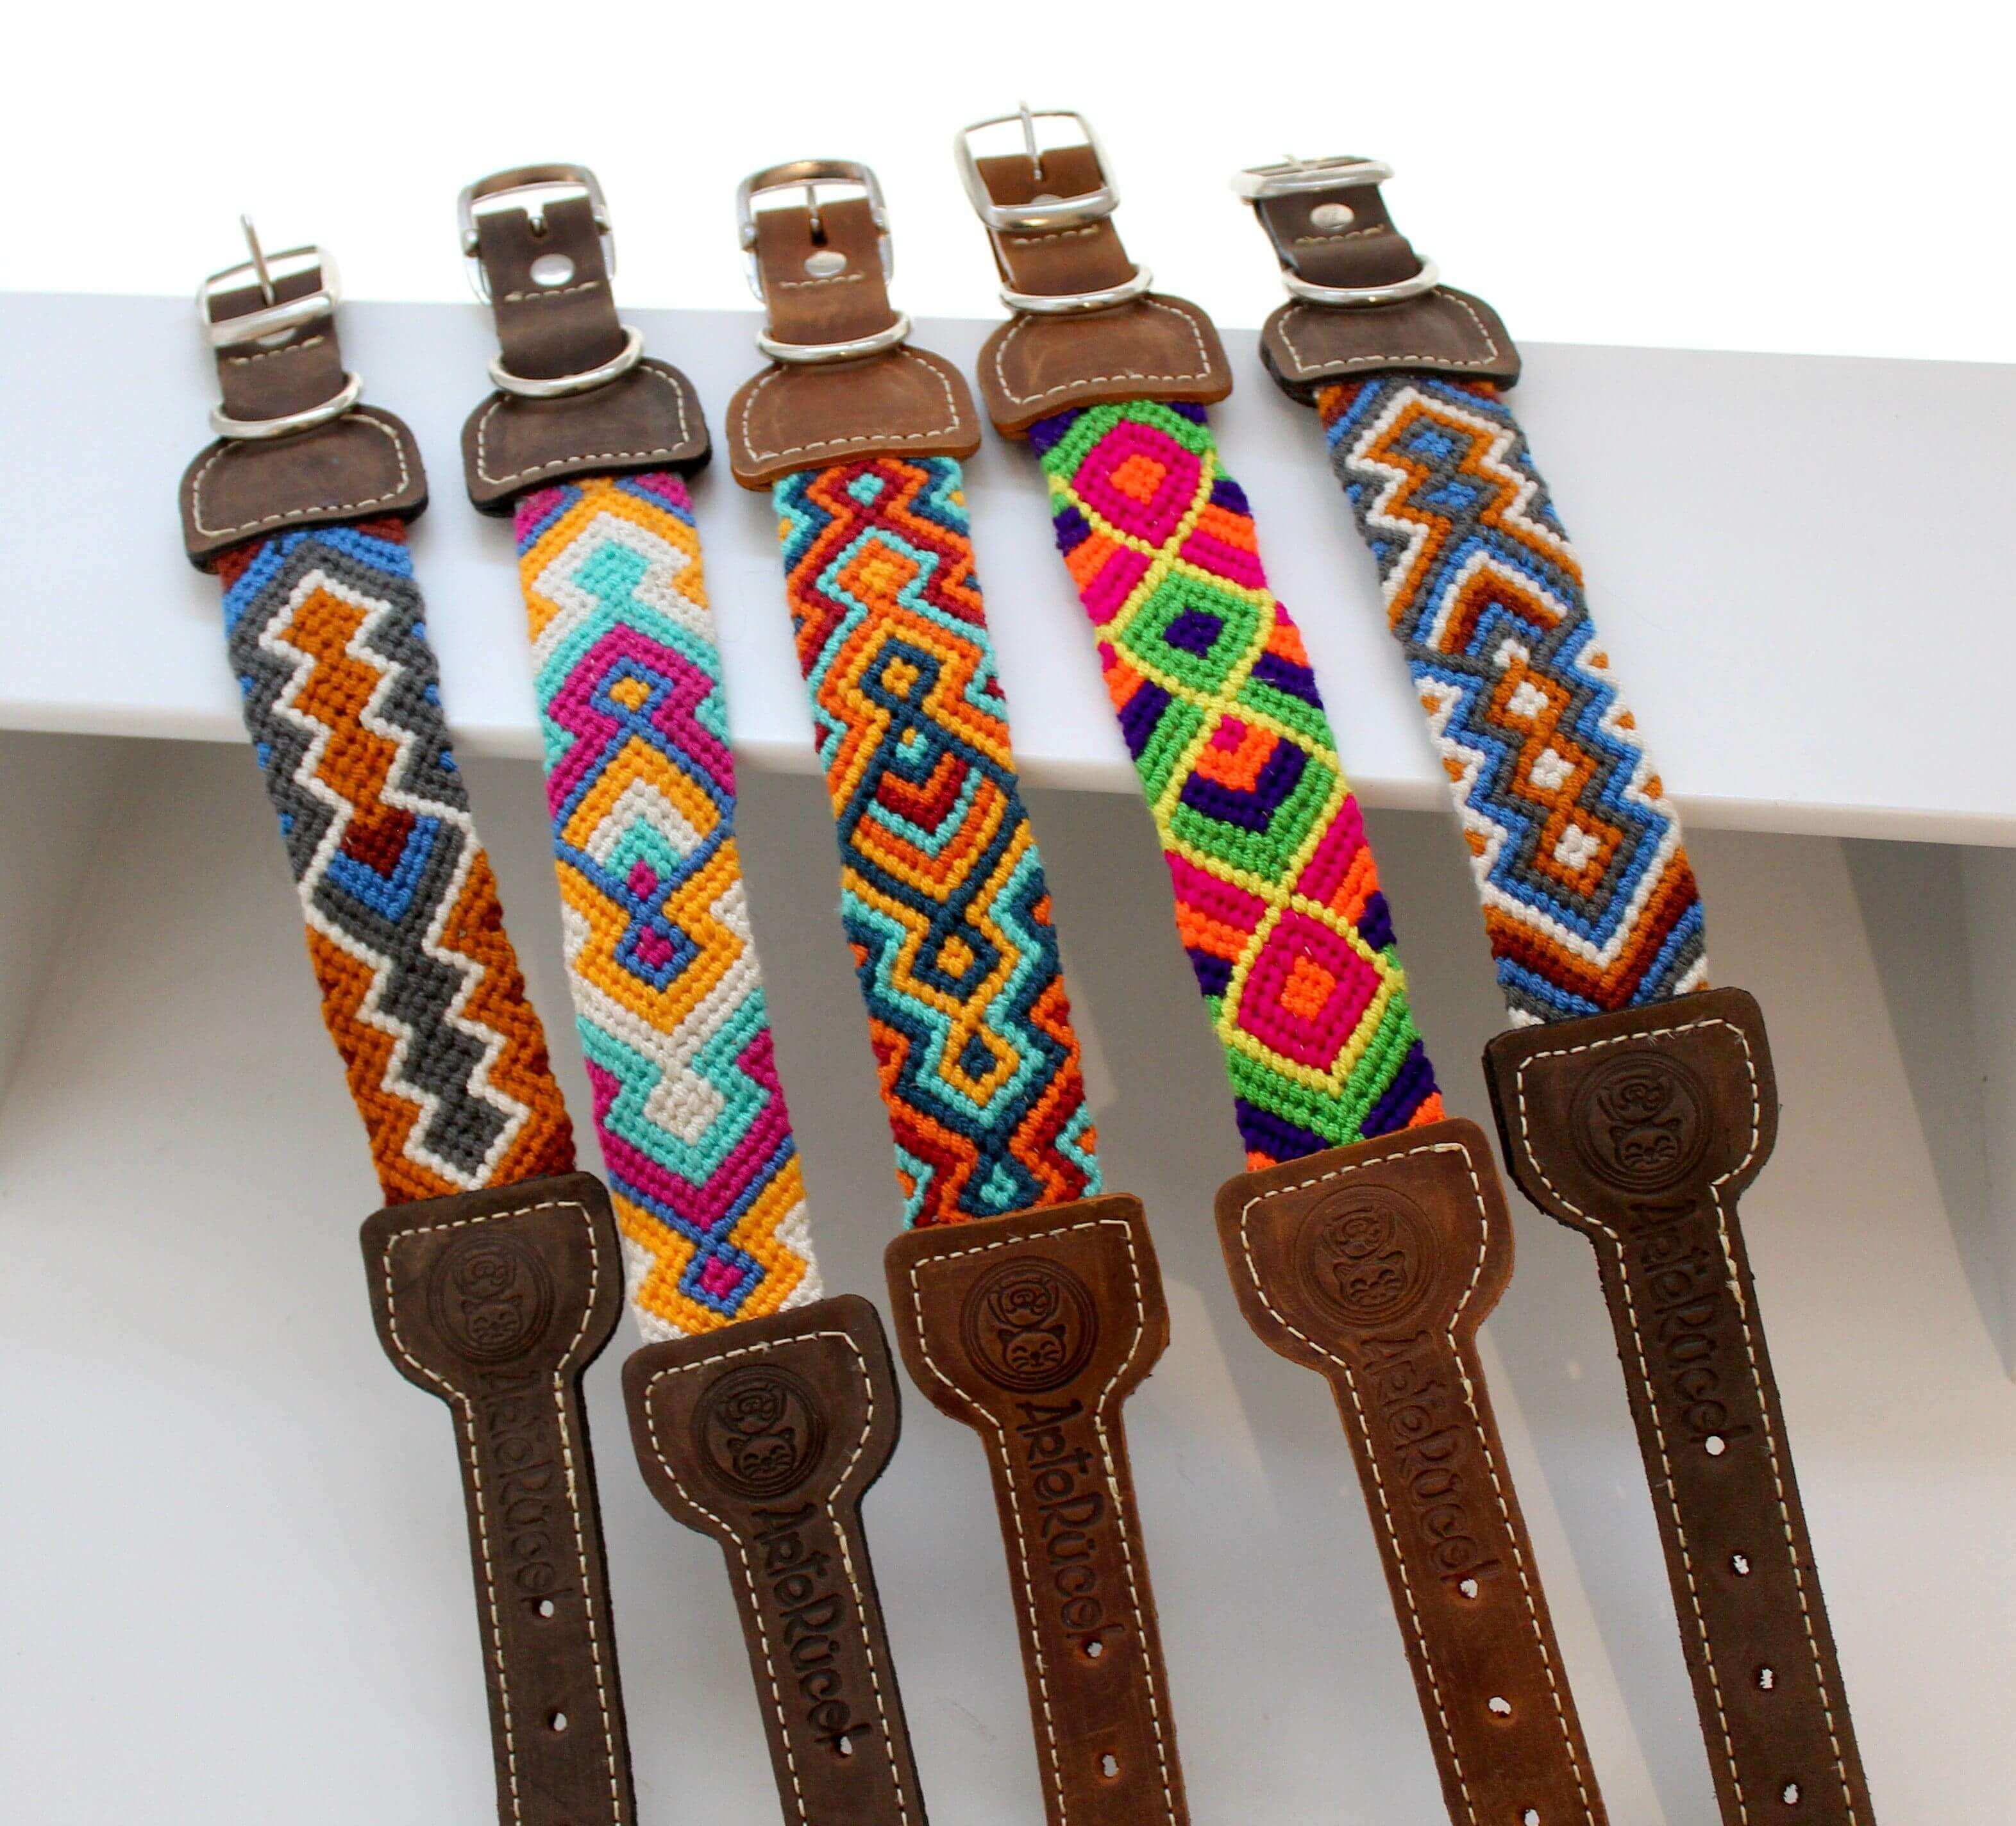 Colourful handwoven dog collars made in Colombia